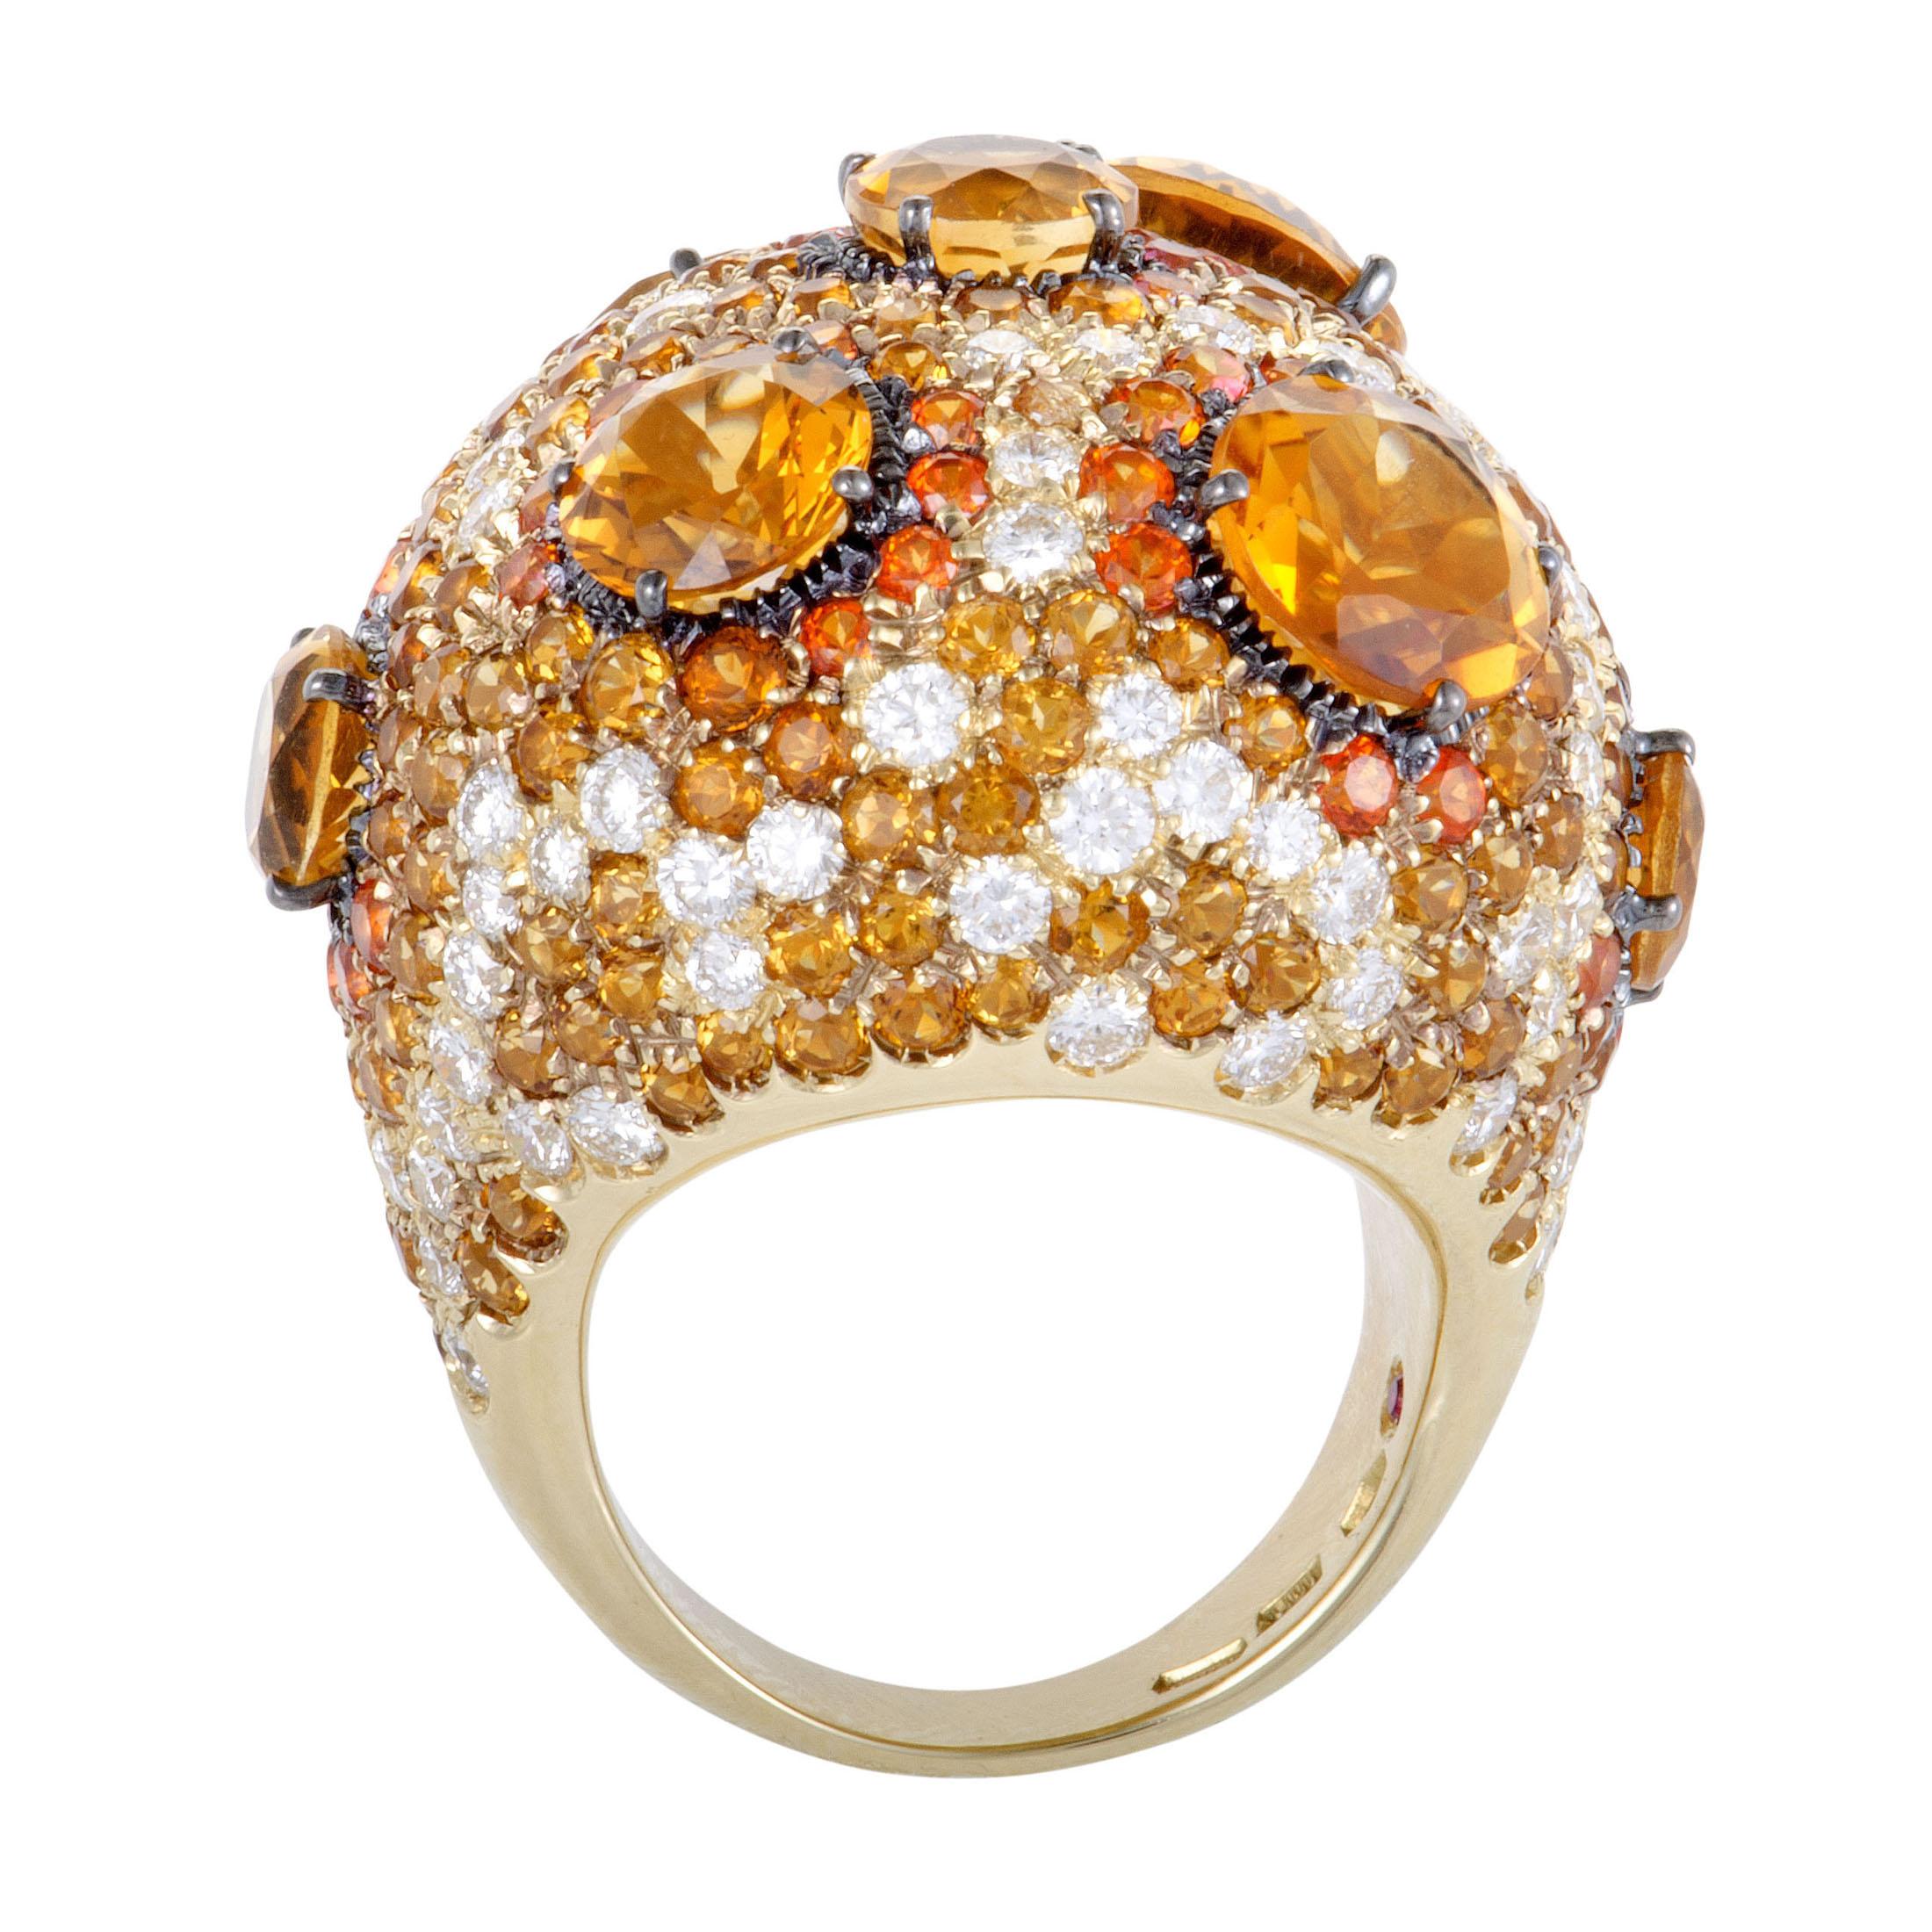 Mesmerizing, flamboyant and certainly memorable, the majestic design of this astonishing ring from Roberto Coin is executed to perfection, with partially black rhodium-plated 18K yellow gold hosting a spellbinding blend of glistening diamonds